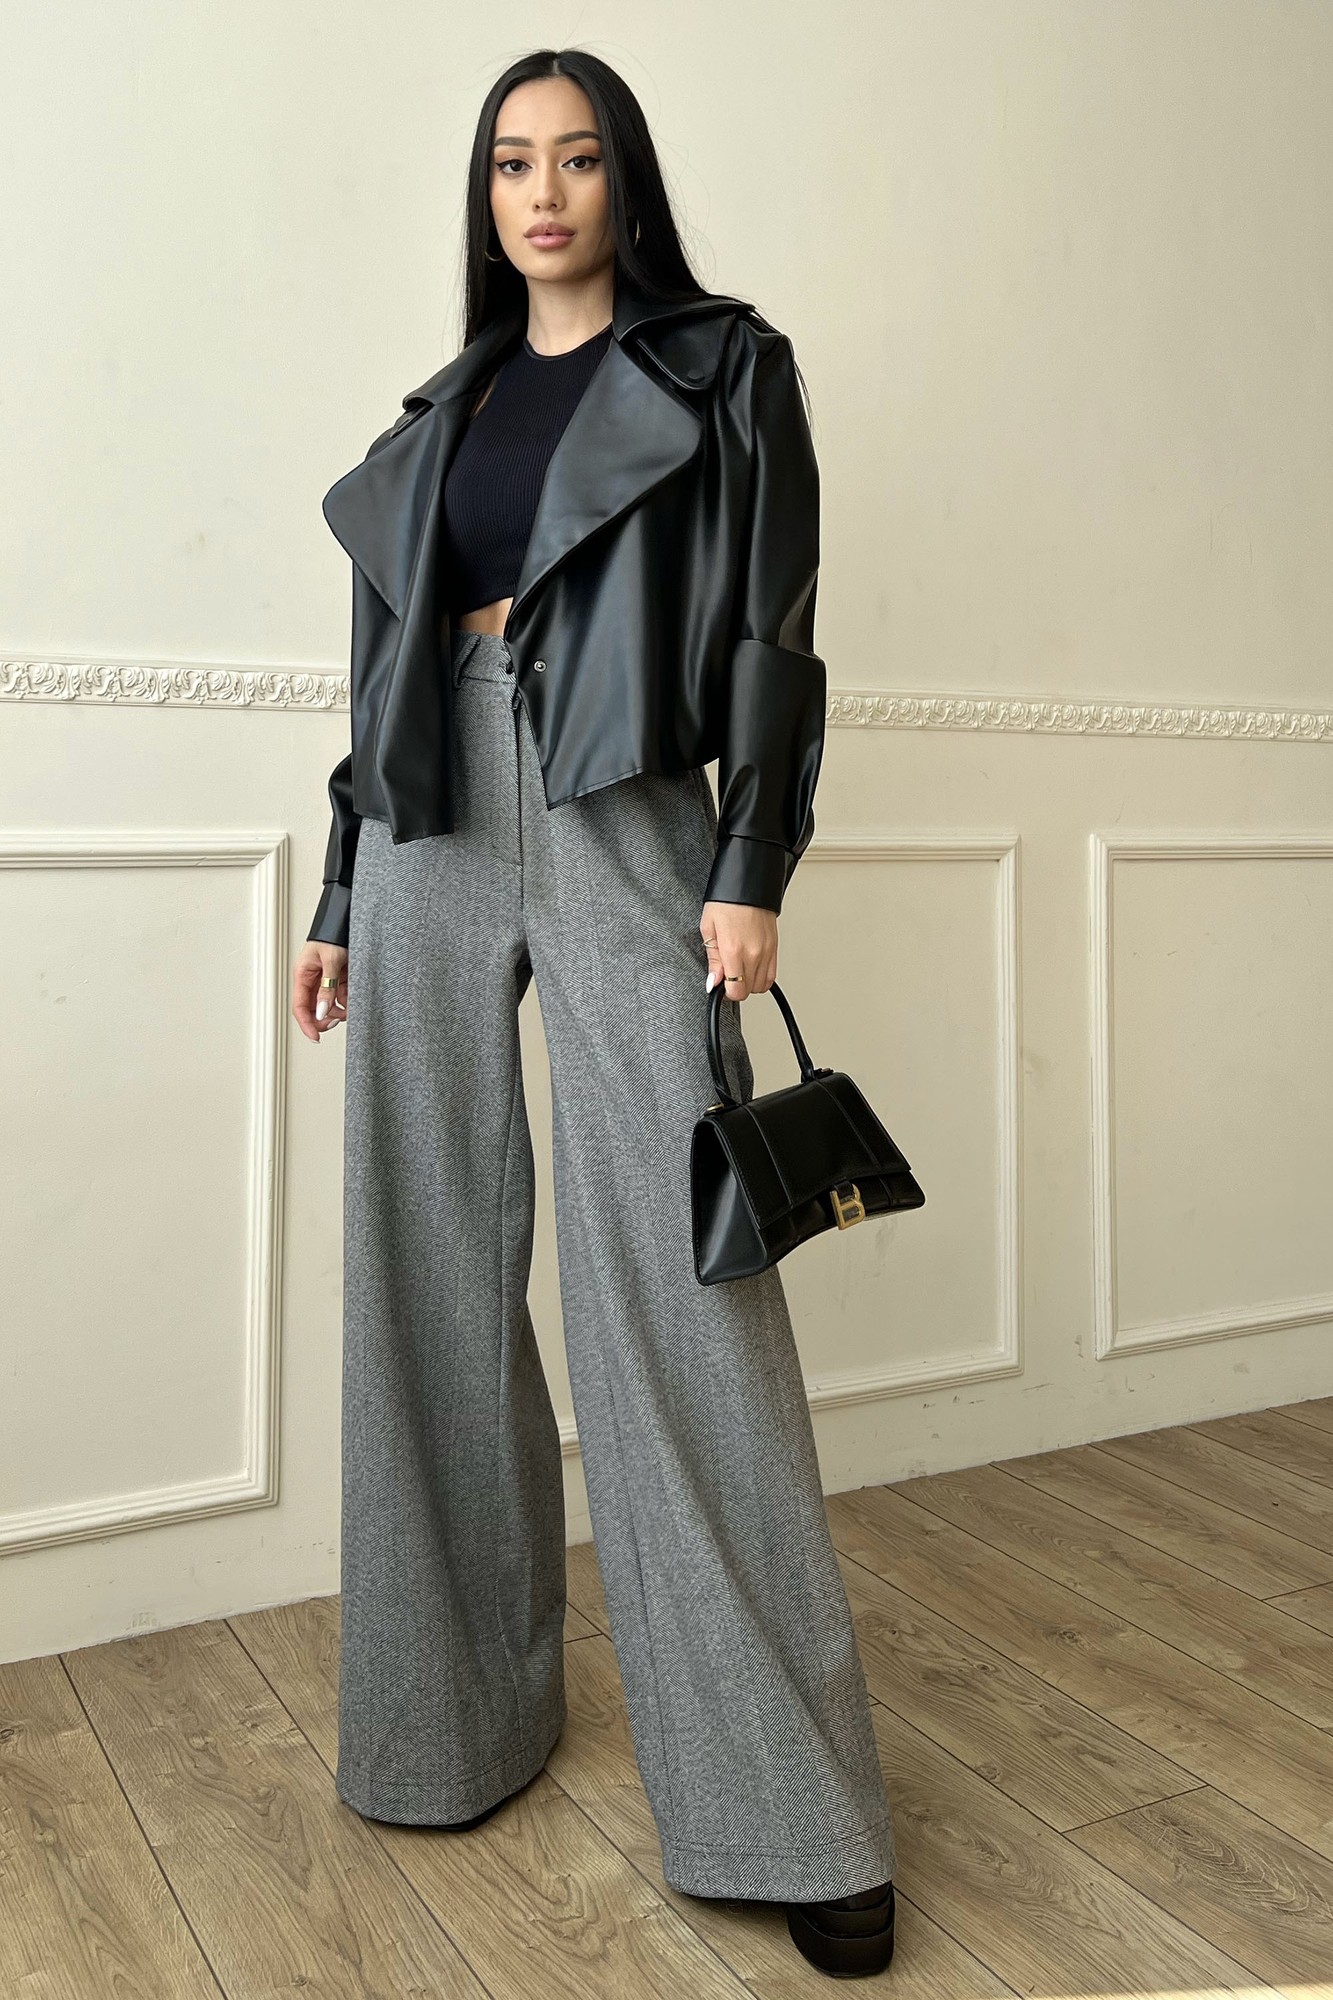 Warm palazzo pants in gray color